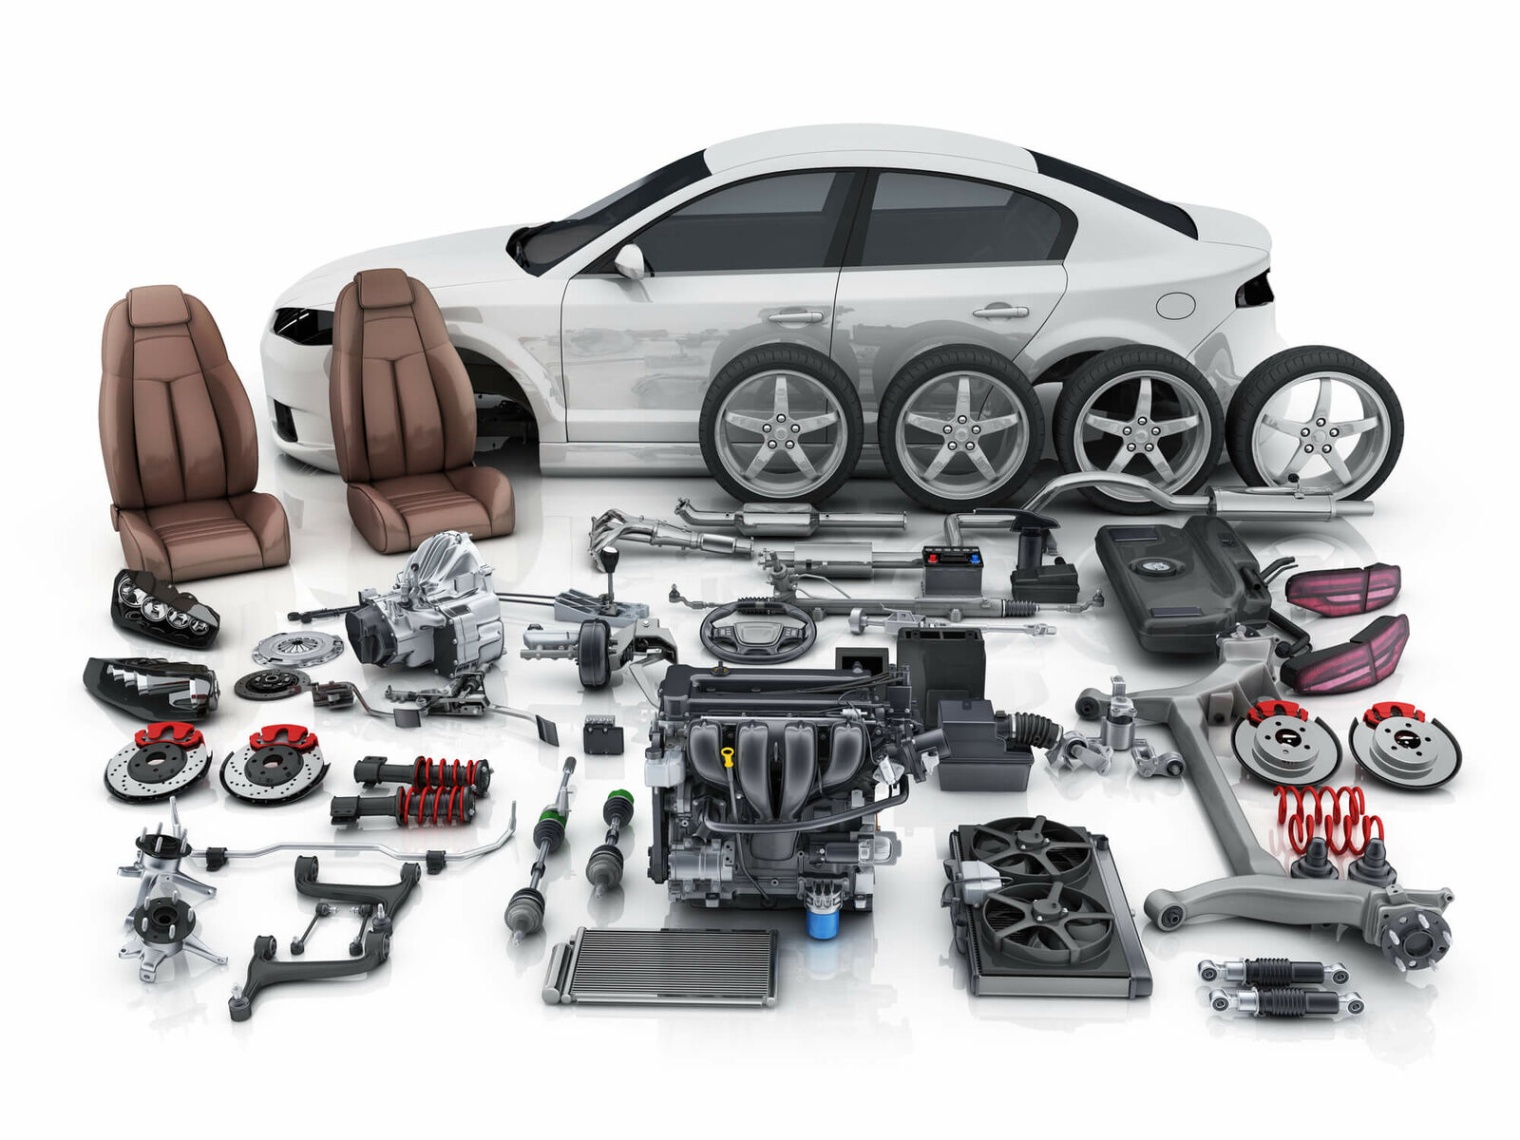 Score Top-notch Deals On EBay For All Your Car Parts And Accessories Needs!